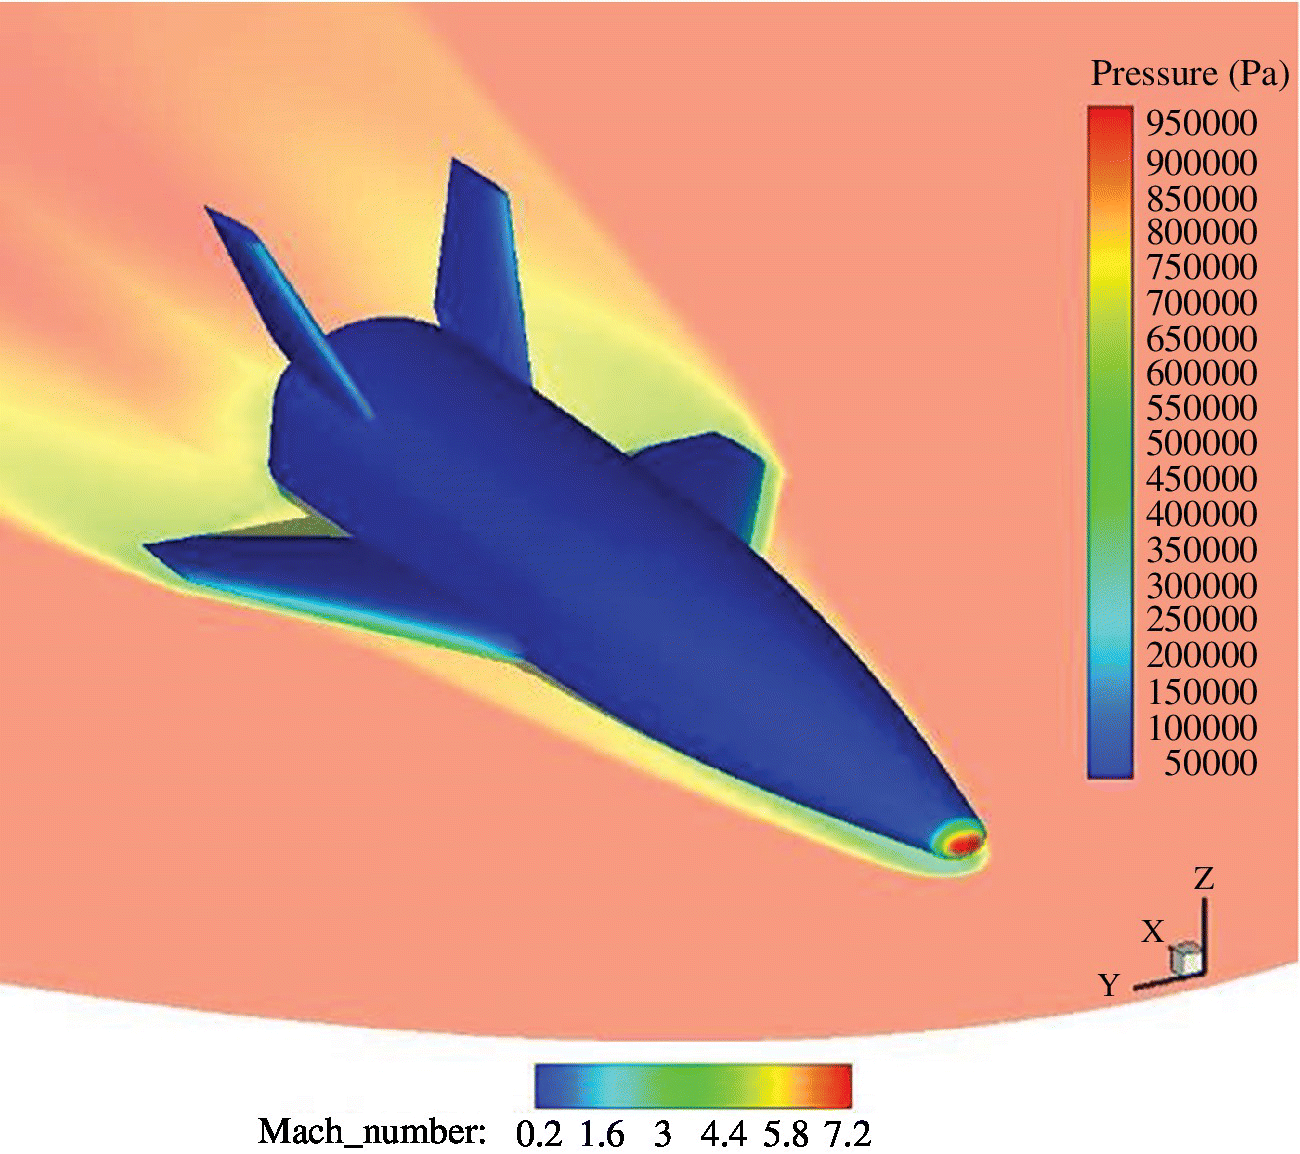 3D image displaying pressure and Mach number distributions on ORV‐WSB surface and wing plane at M∞ = 7 and α = 5°.